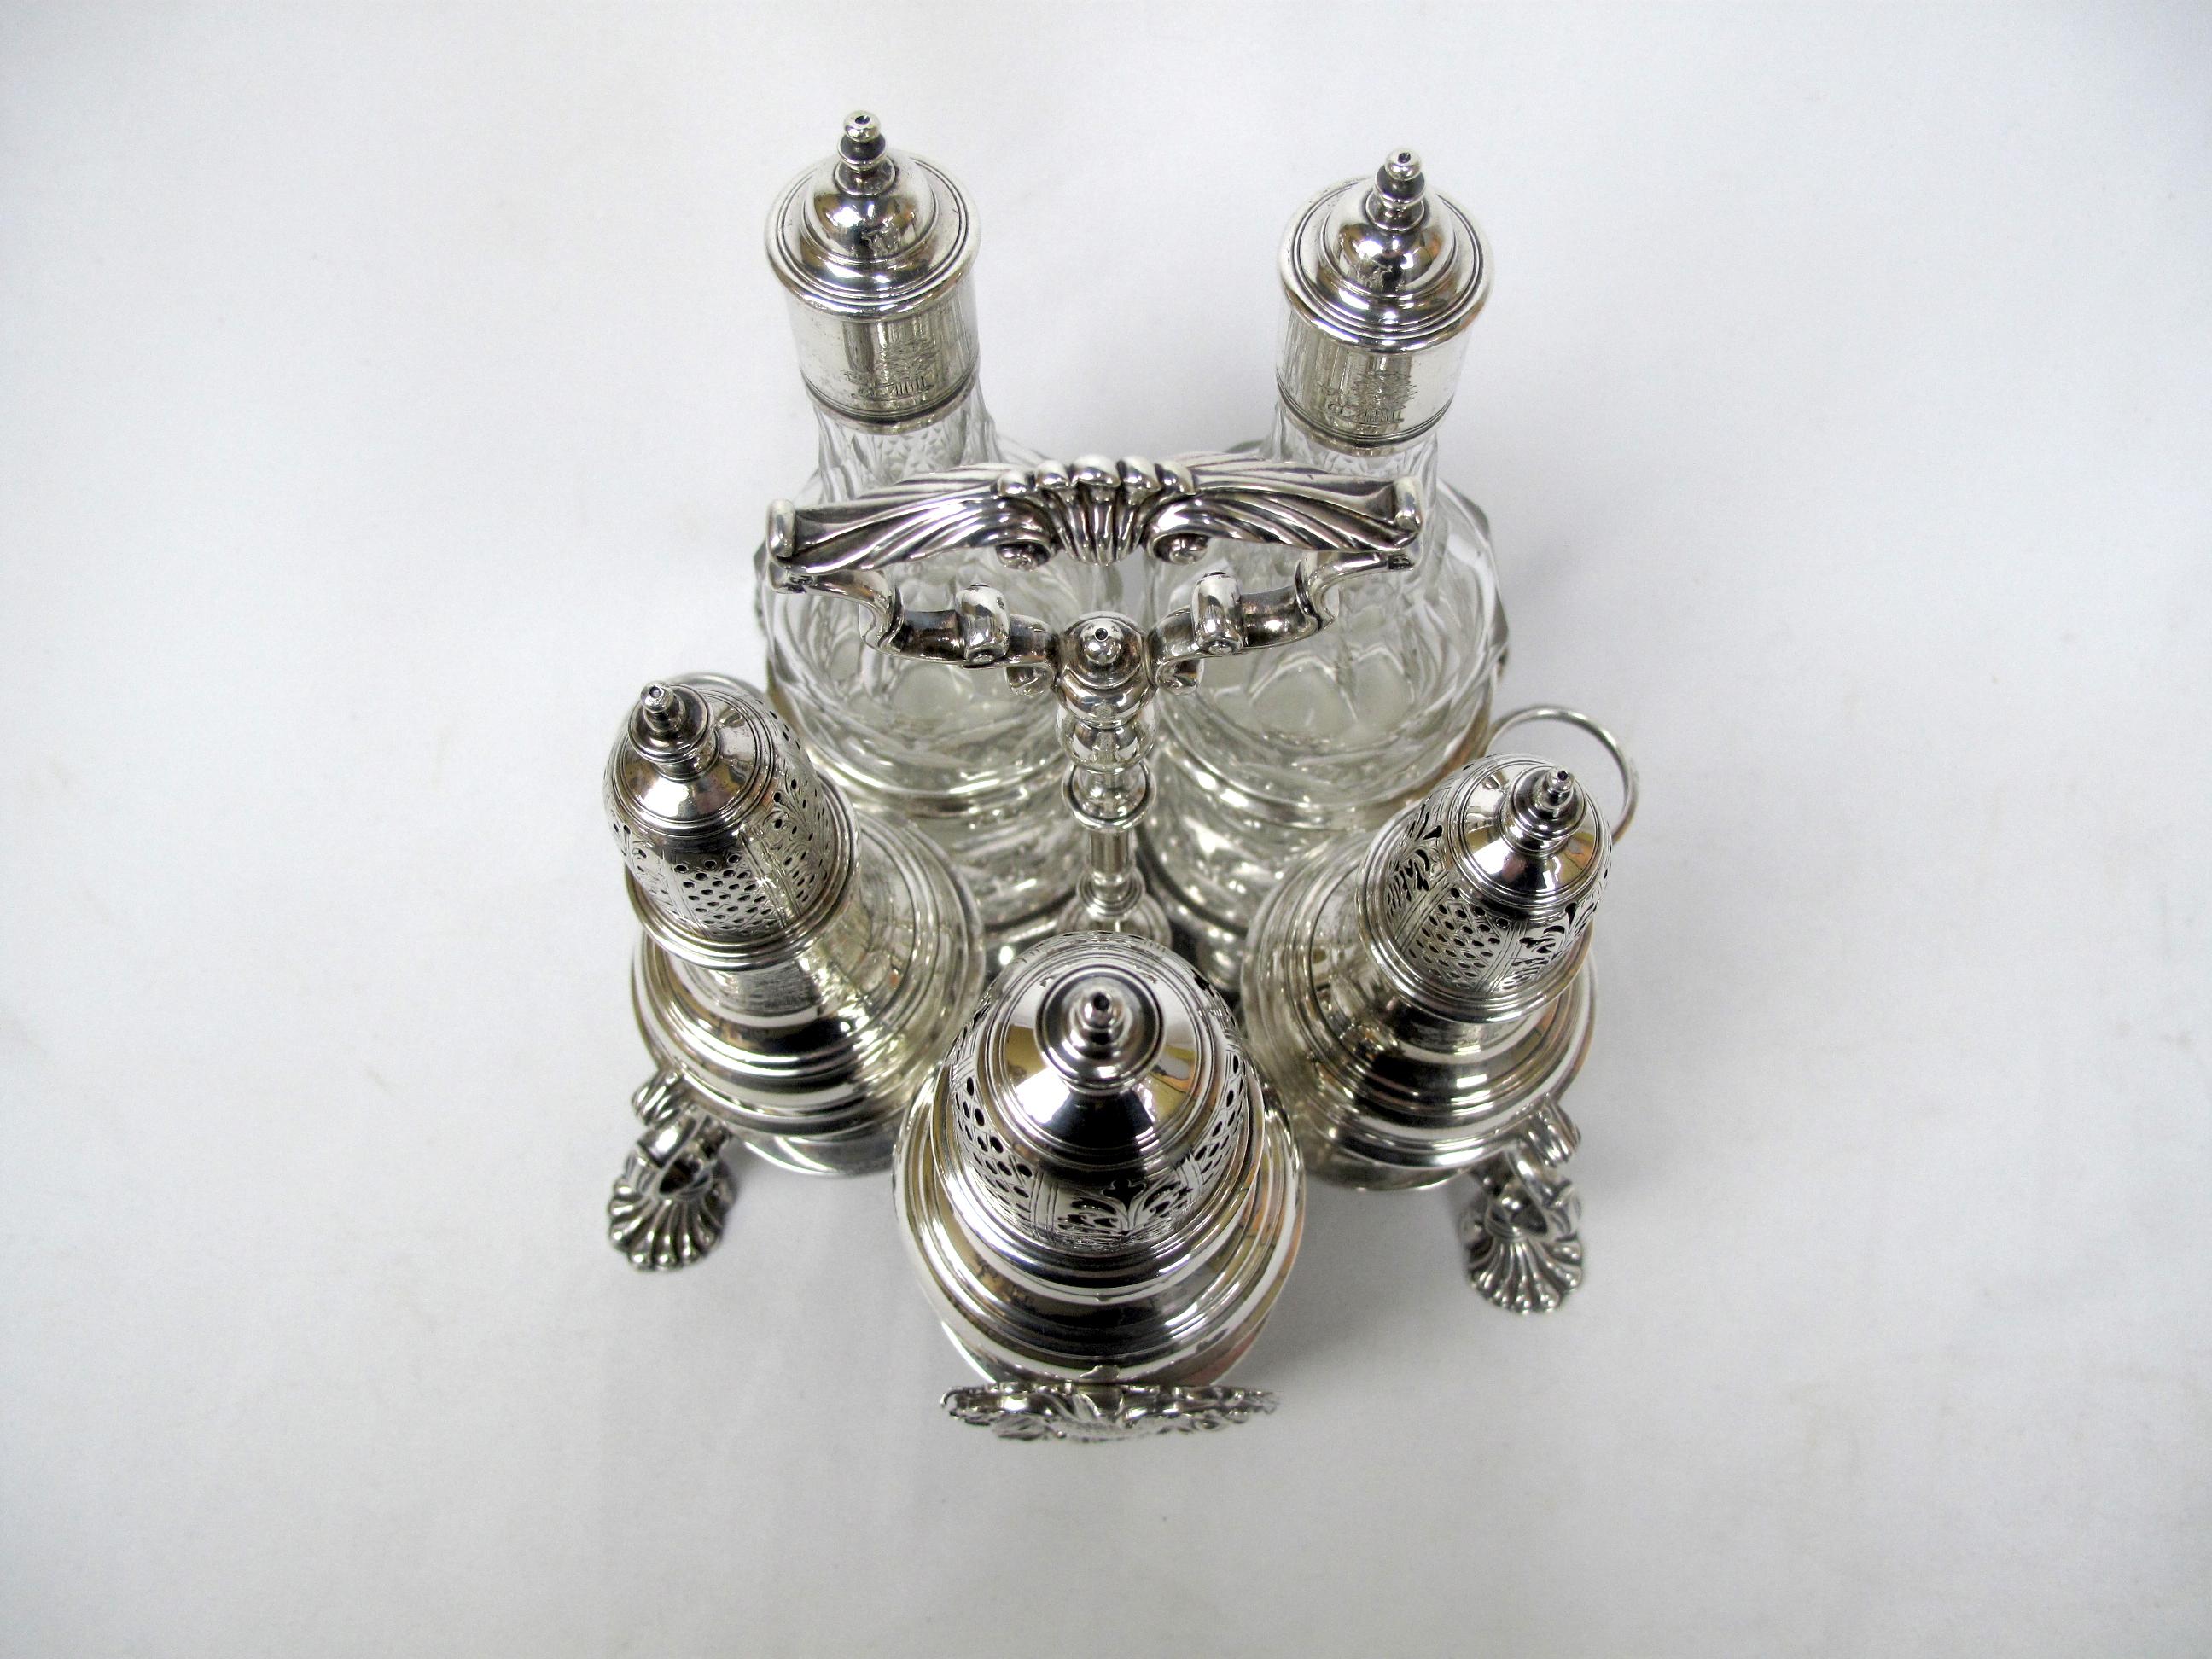 English sterling silver “Warwick” type cruet set. It features a matching set of 3 baluster shaped silver castors with pull of tops and 2 silver and faceted glass oil and vinegar bottles and a four footed sterling silver stand with handle.. The